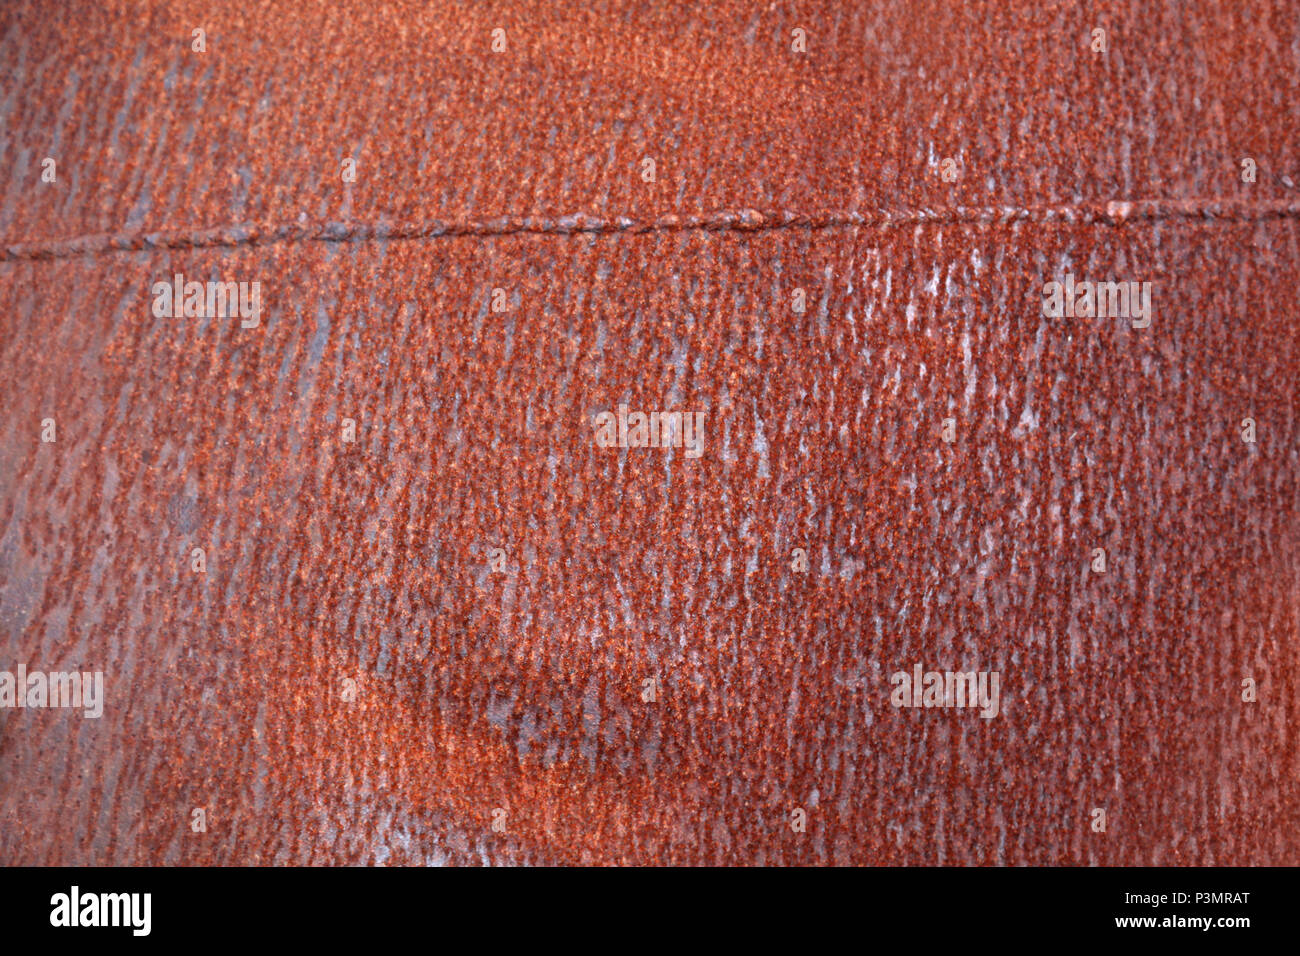 Rusty corroded steel texture background Stock Photo